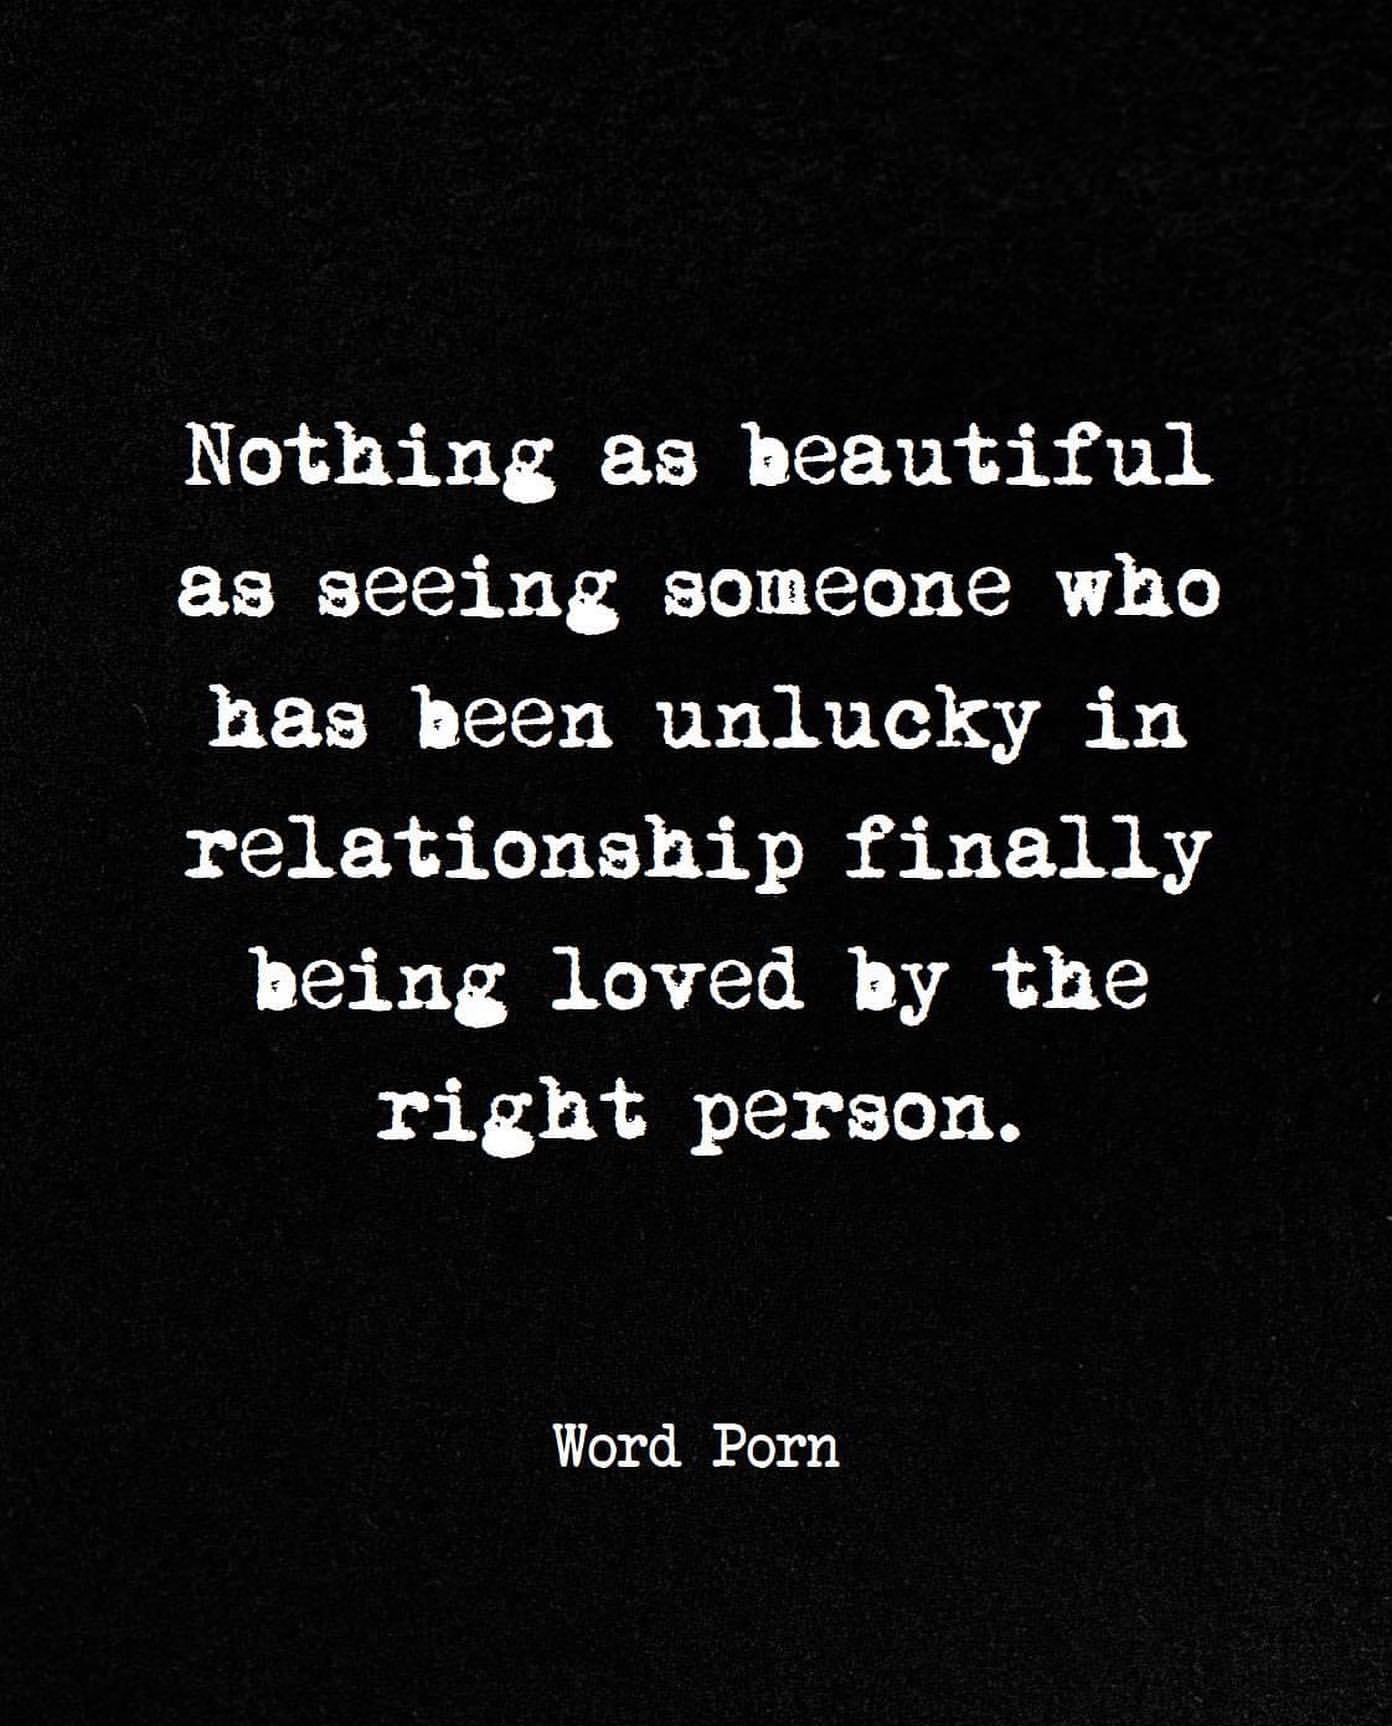 Nothing as beautiful as seeing someone who has been unlucky in relationship finally being loved by the right person.